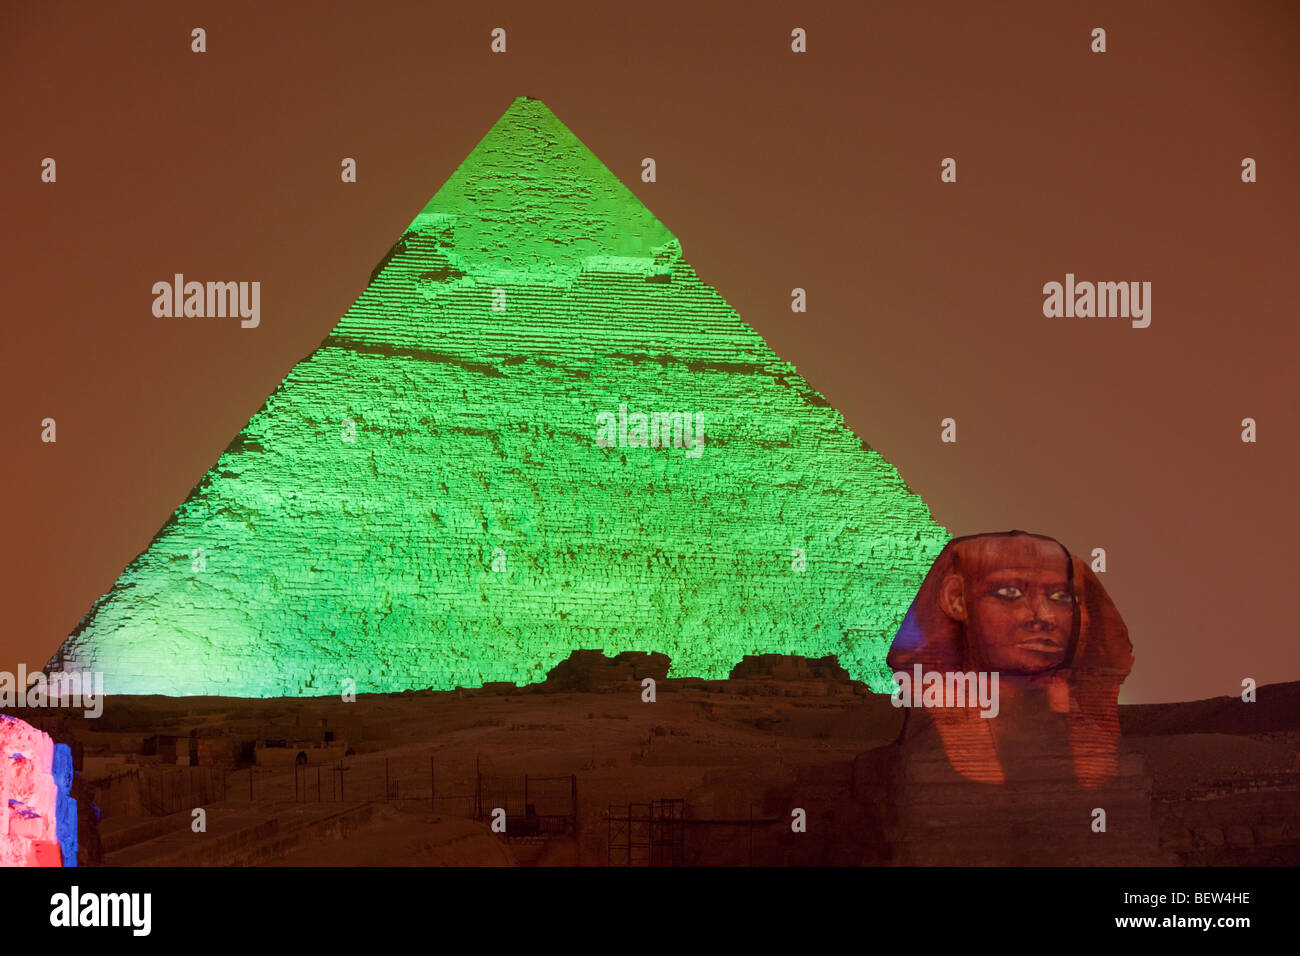 Light and Sound Show at Pyramids of Giza, Cairo, Egypt Stock Photo